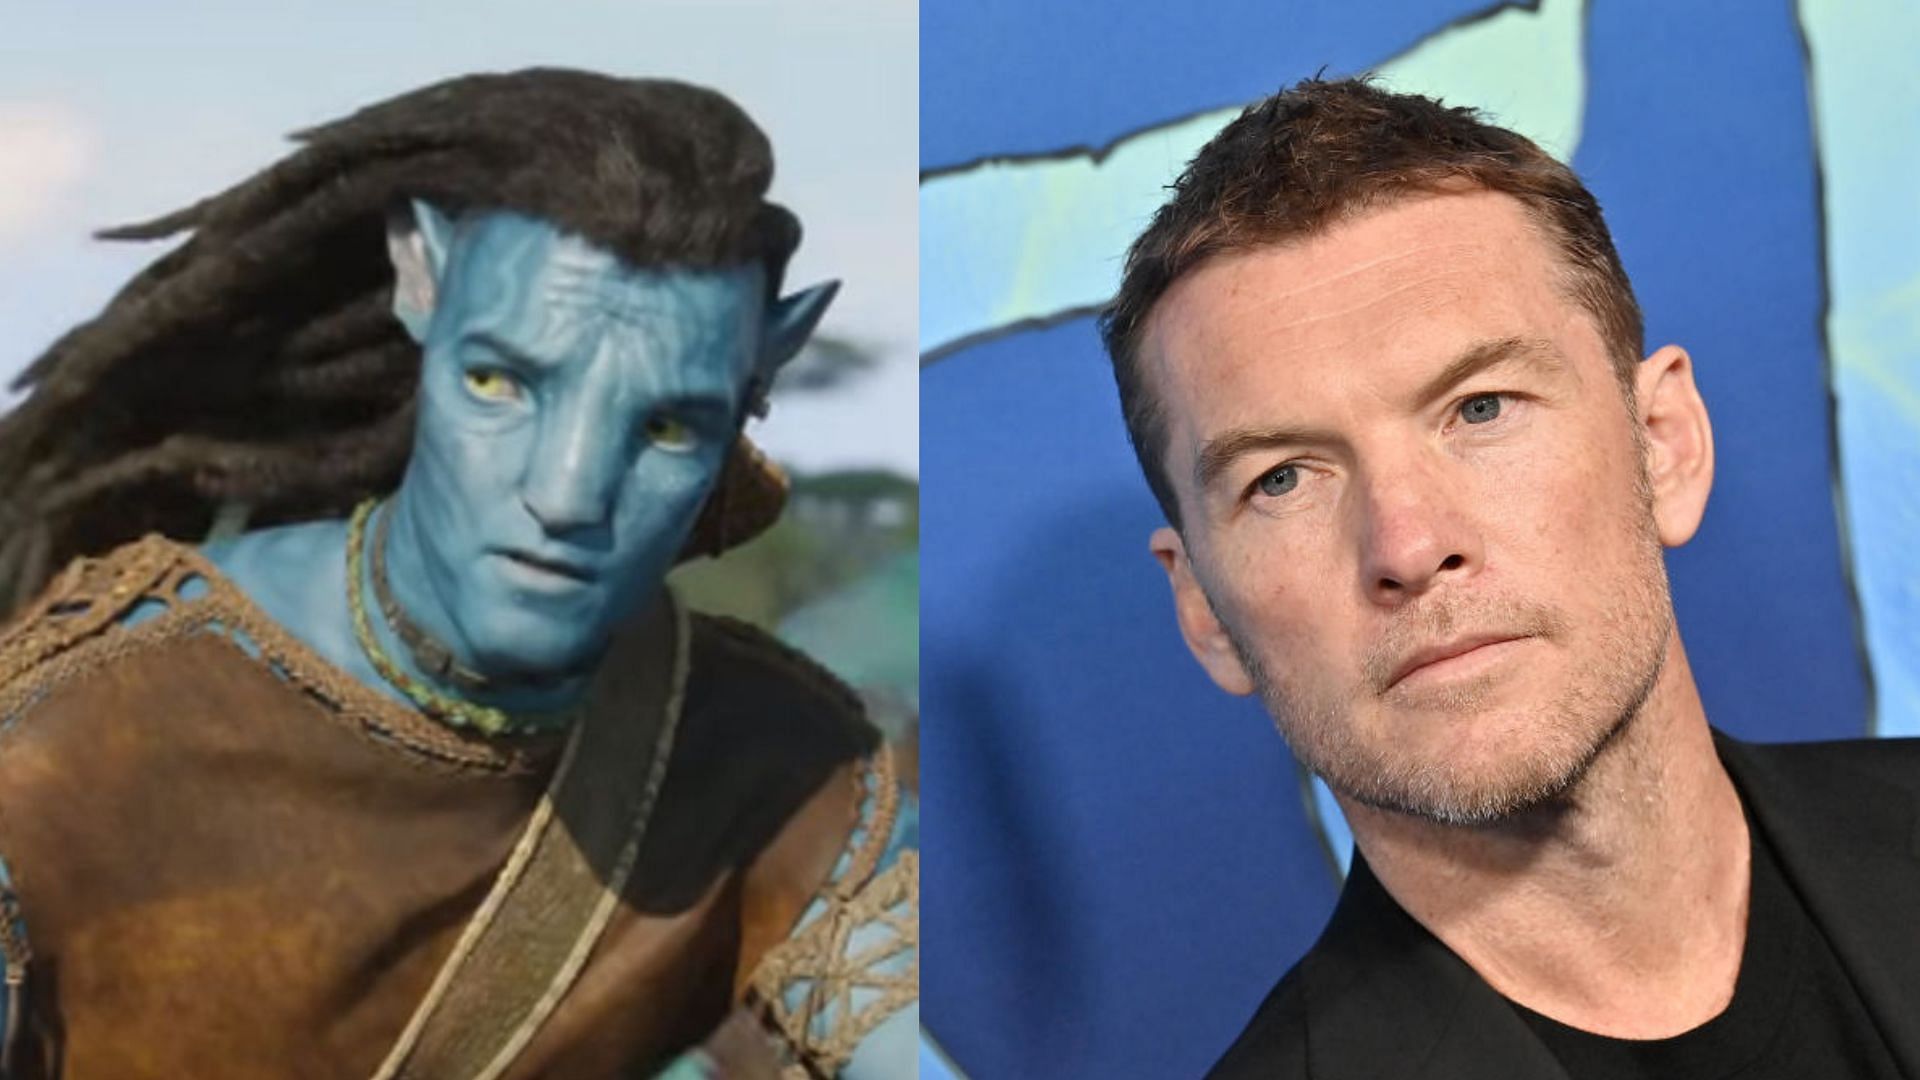 Avatar 2 cast All actors  characters in The Way of Water  Dexerto